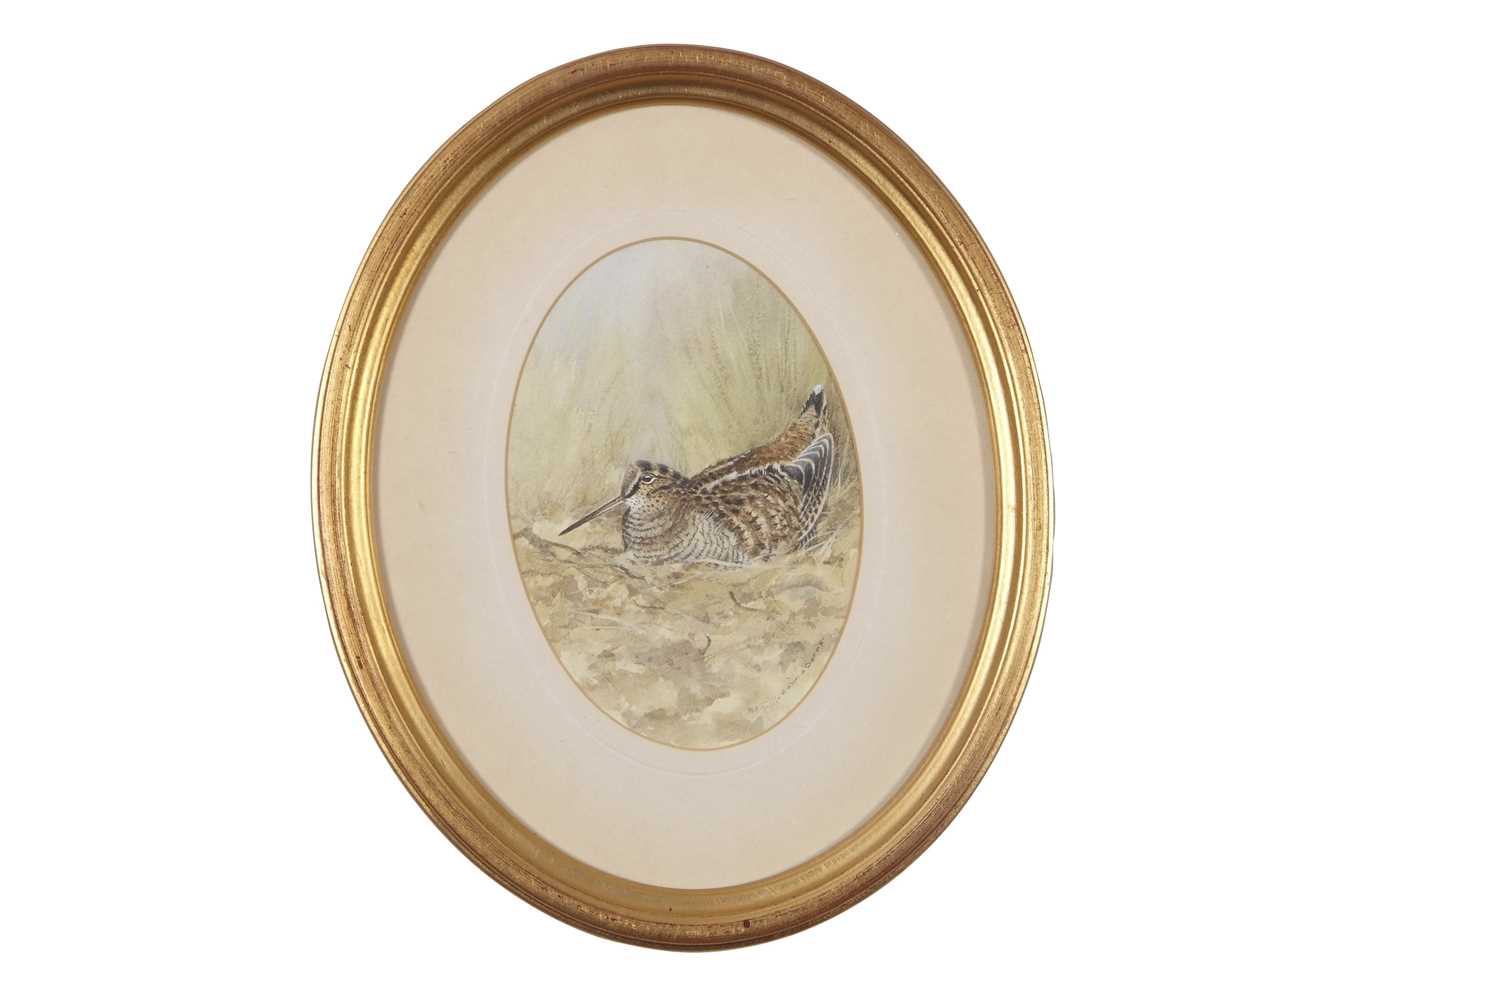 Colin Burns (British, b.1944), "Woodcock", watercolour in oval, signed,11x15cm, framed and glazed.